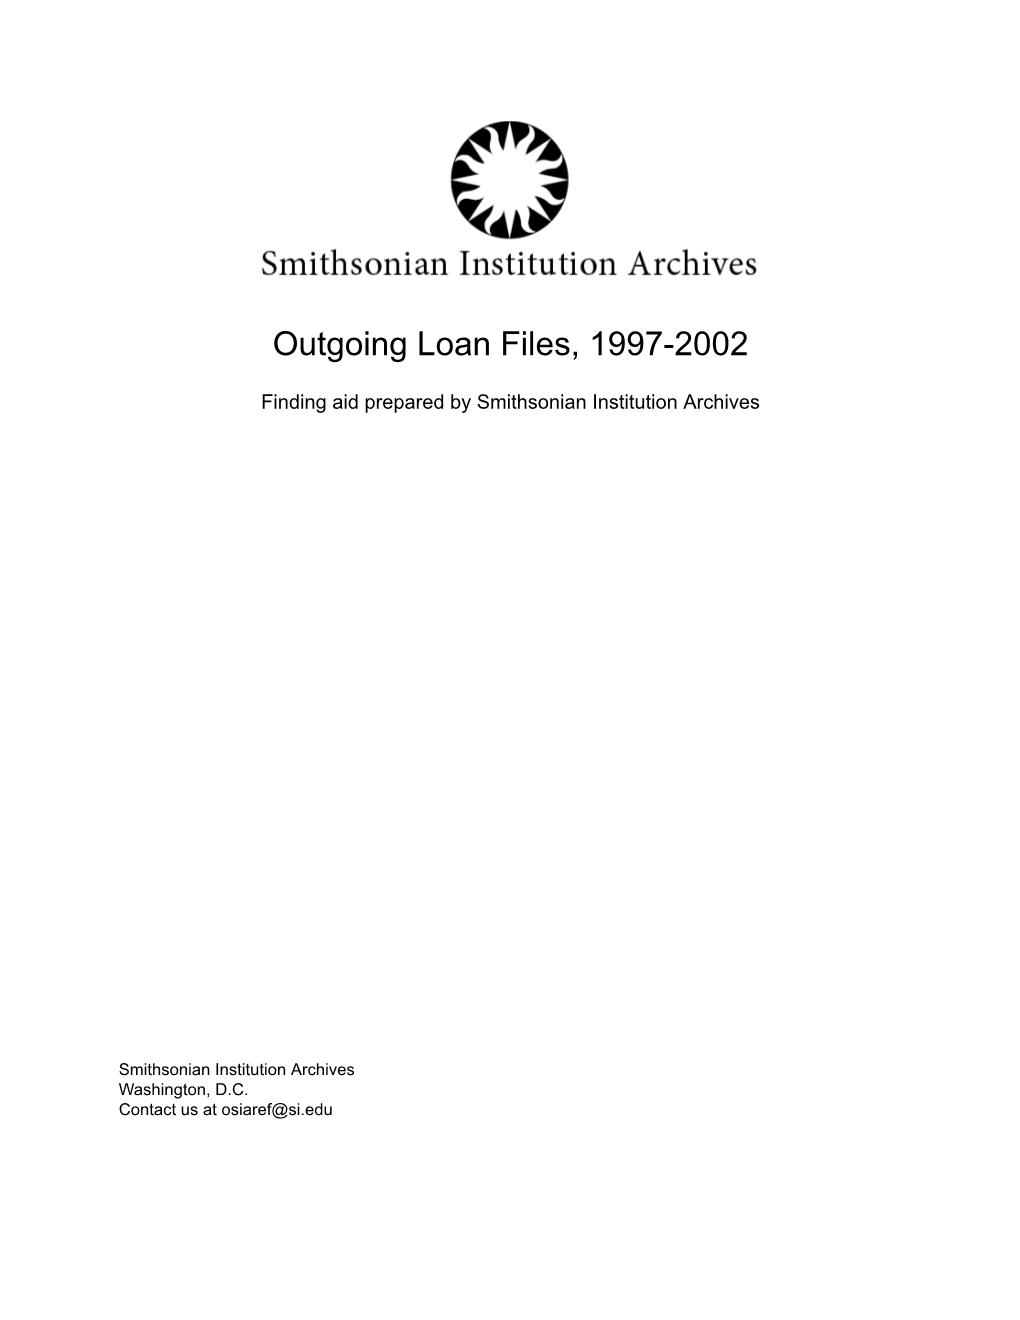 Outgoing Loan Files, 1997-2002